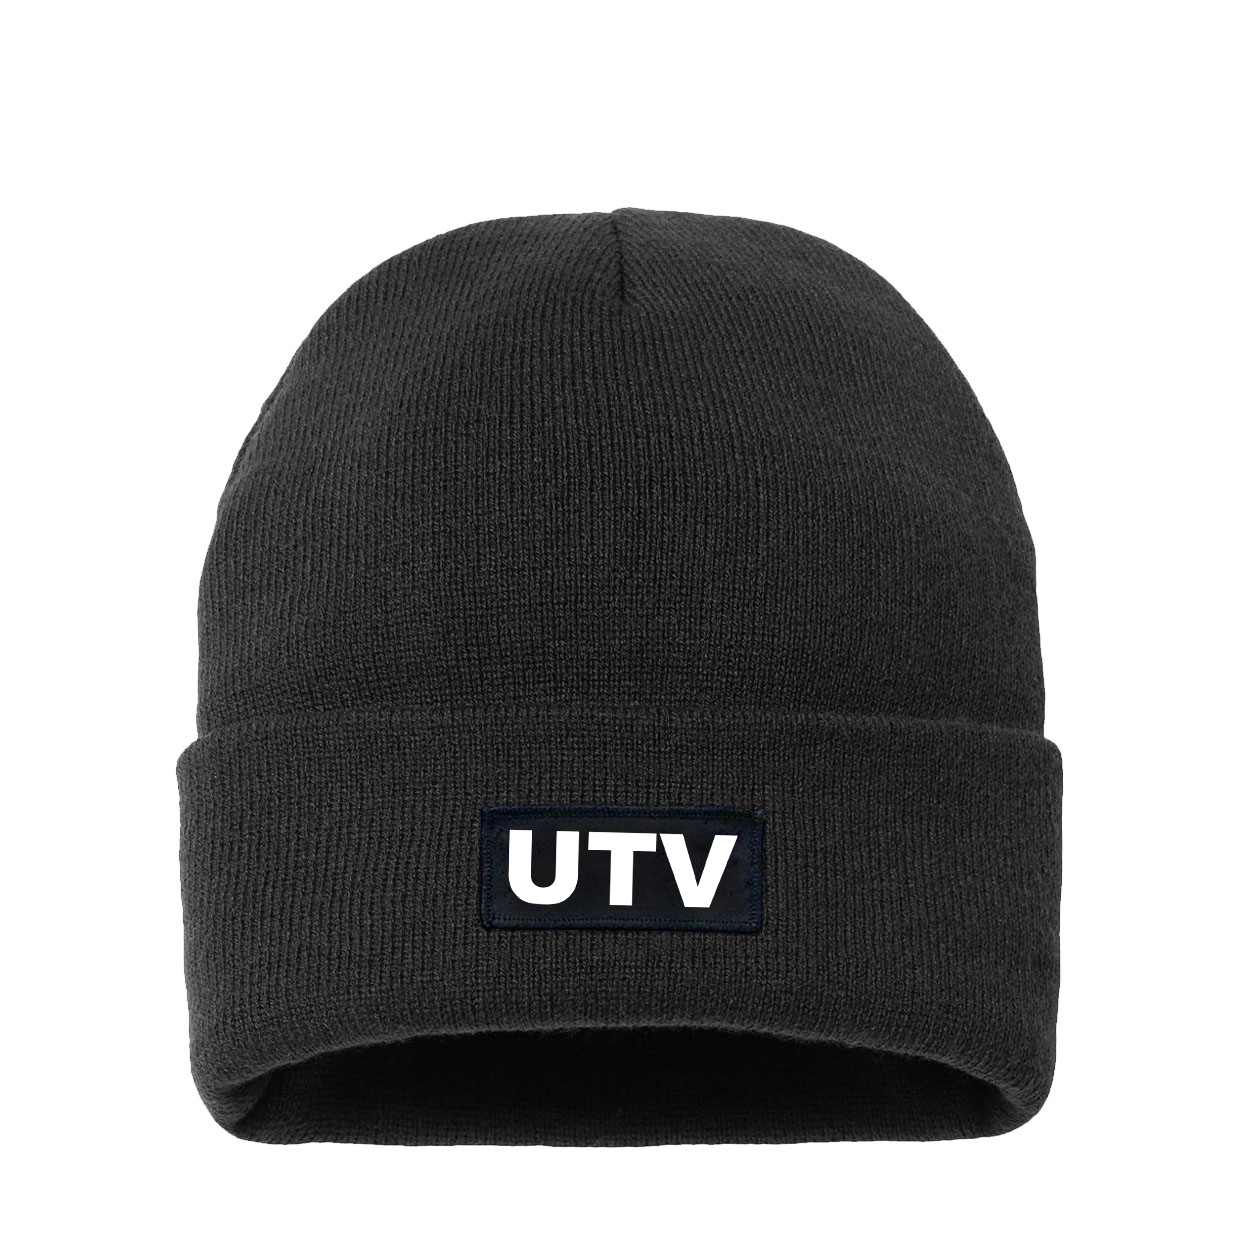 Utv Brand Logo Night Out Woven Patch Night Out Sherpa Lined Cuffed Beanie Black